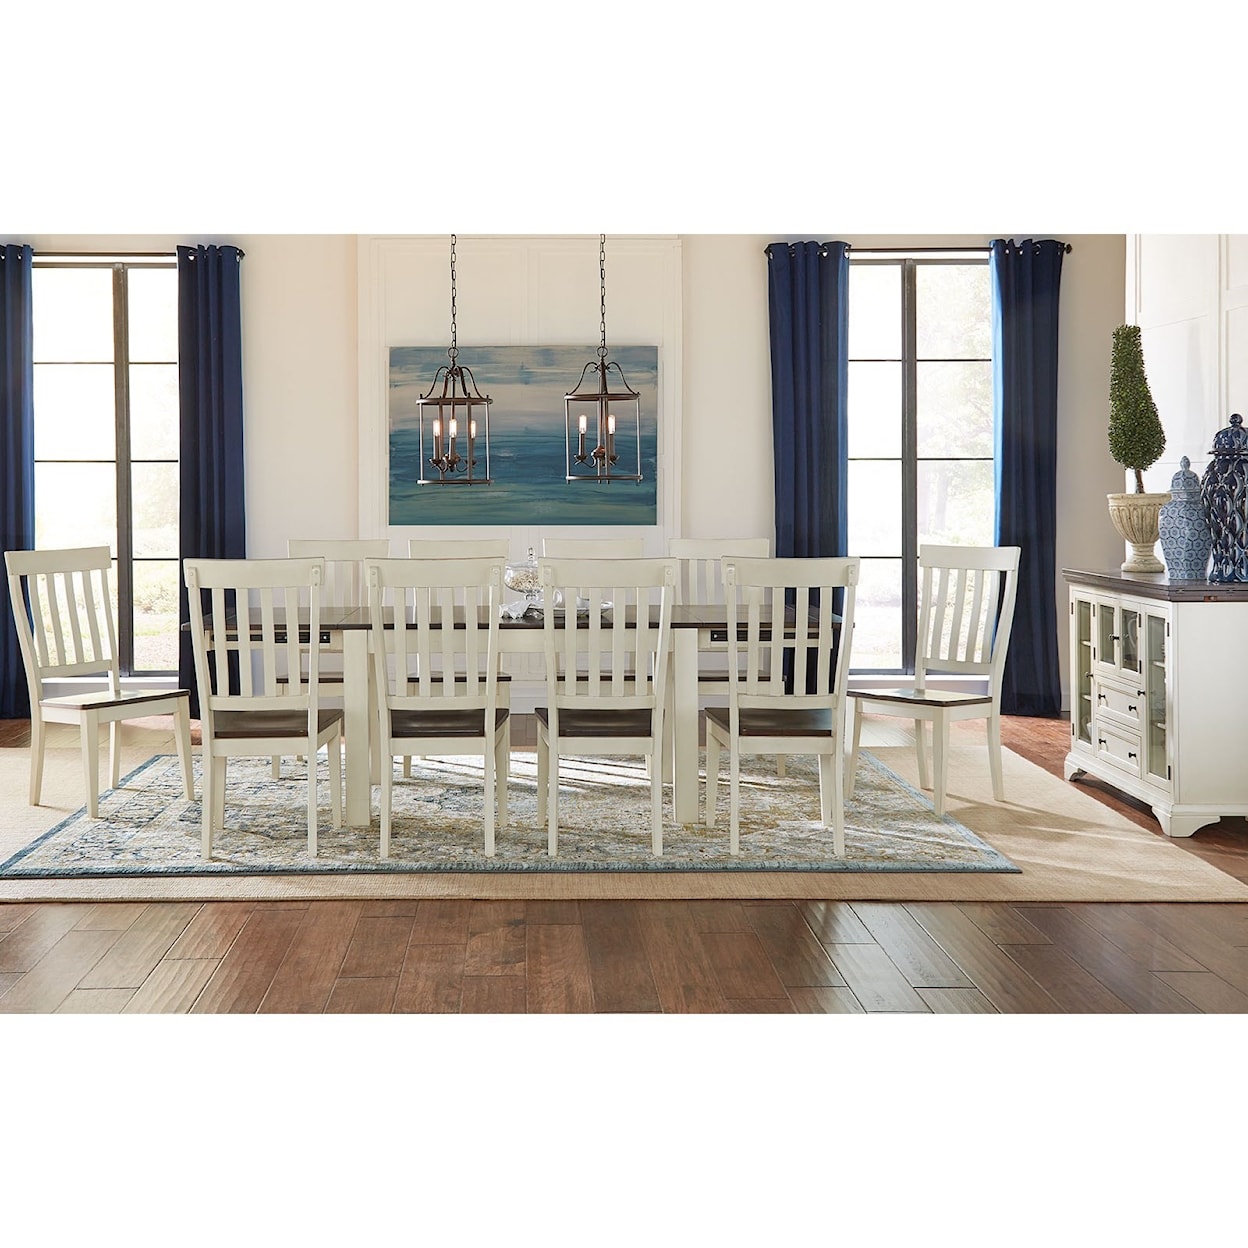 A-A Mariposa Dining Room Group